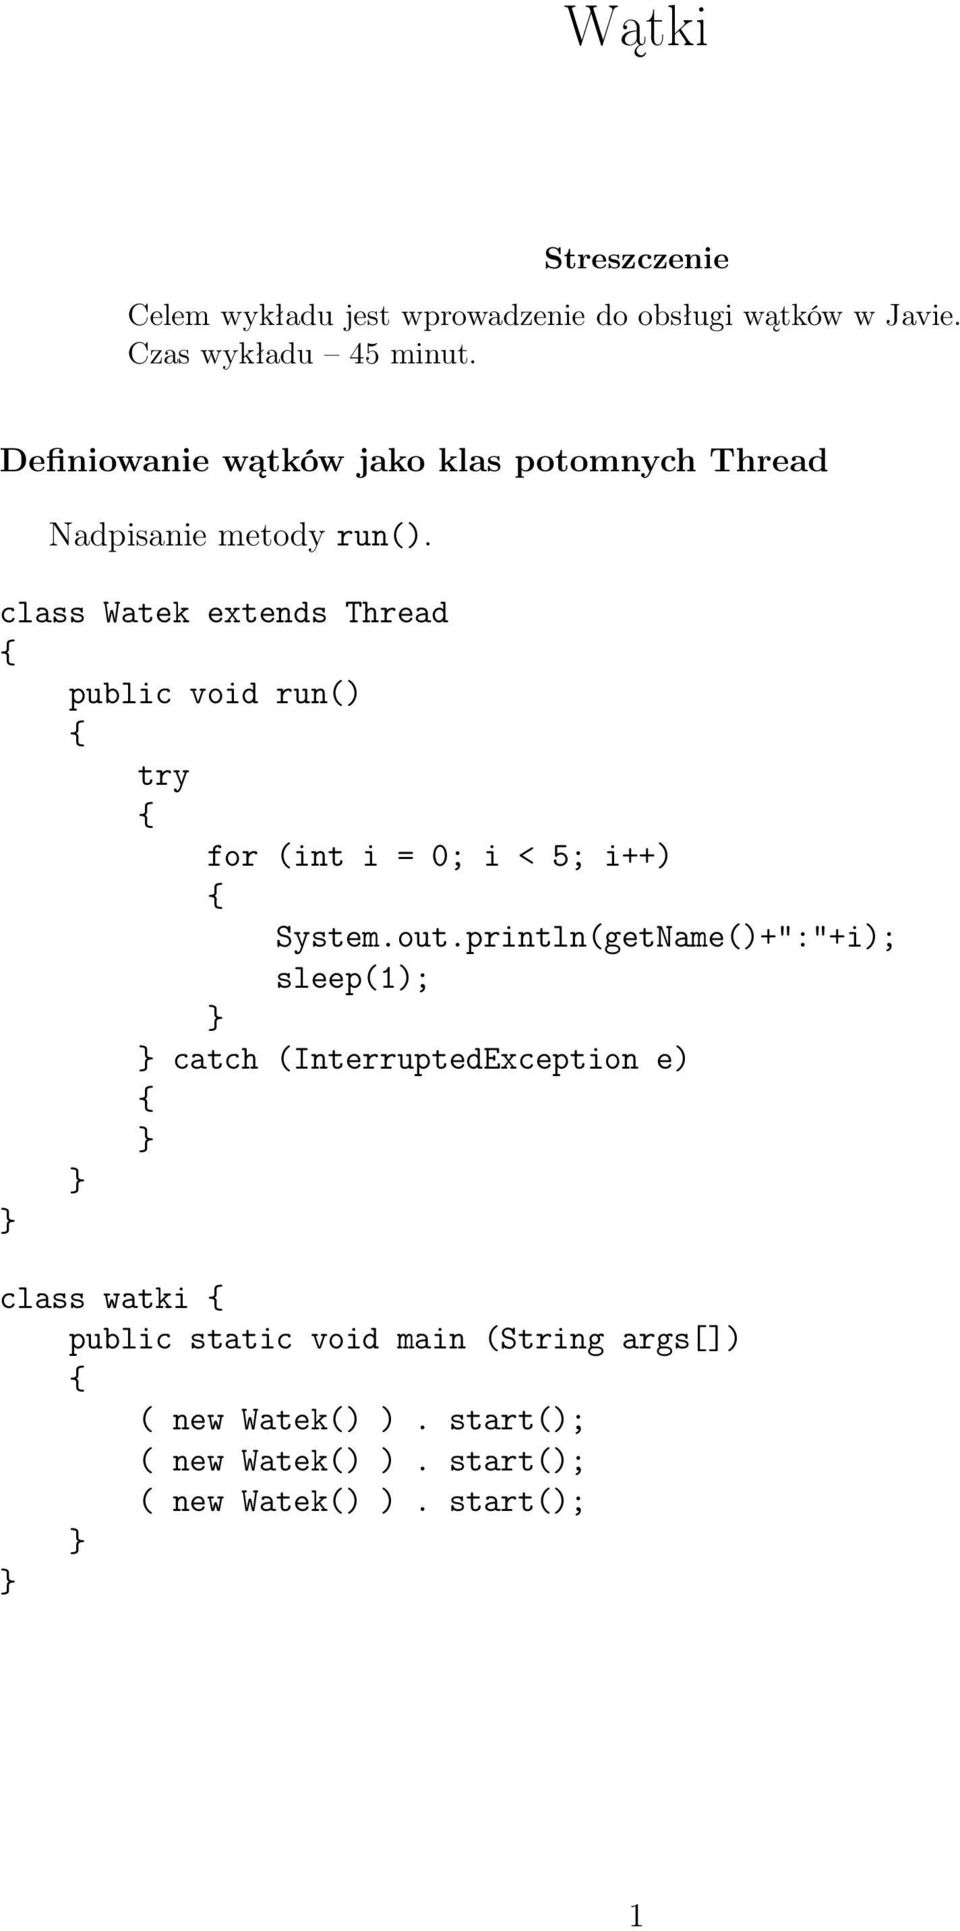 class Watek extends Thread public void run() try for (int i = 0; i < 5; i++) System.out.